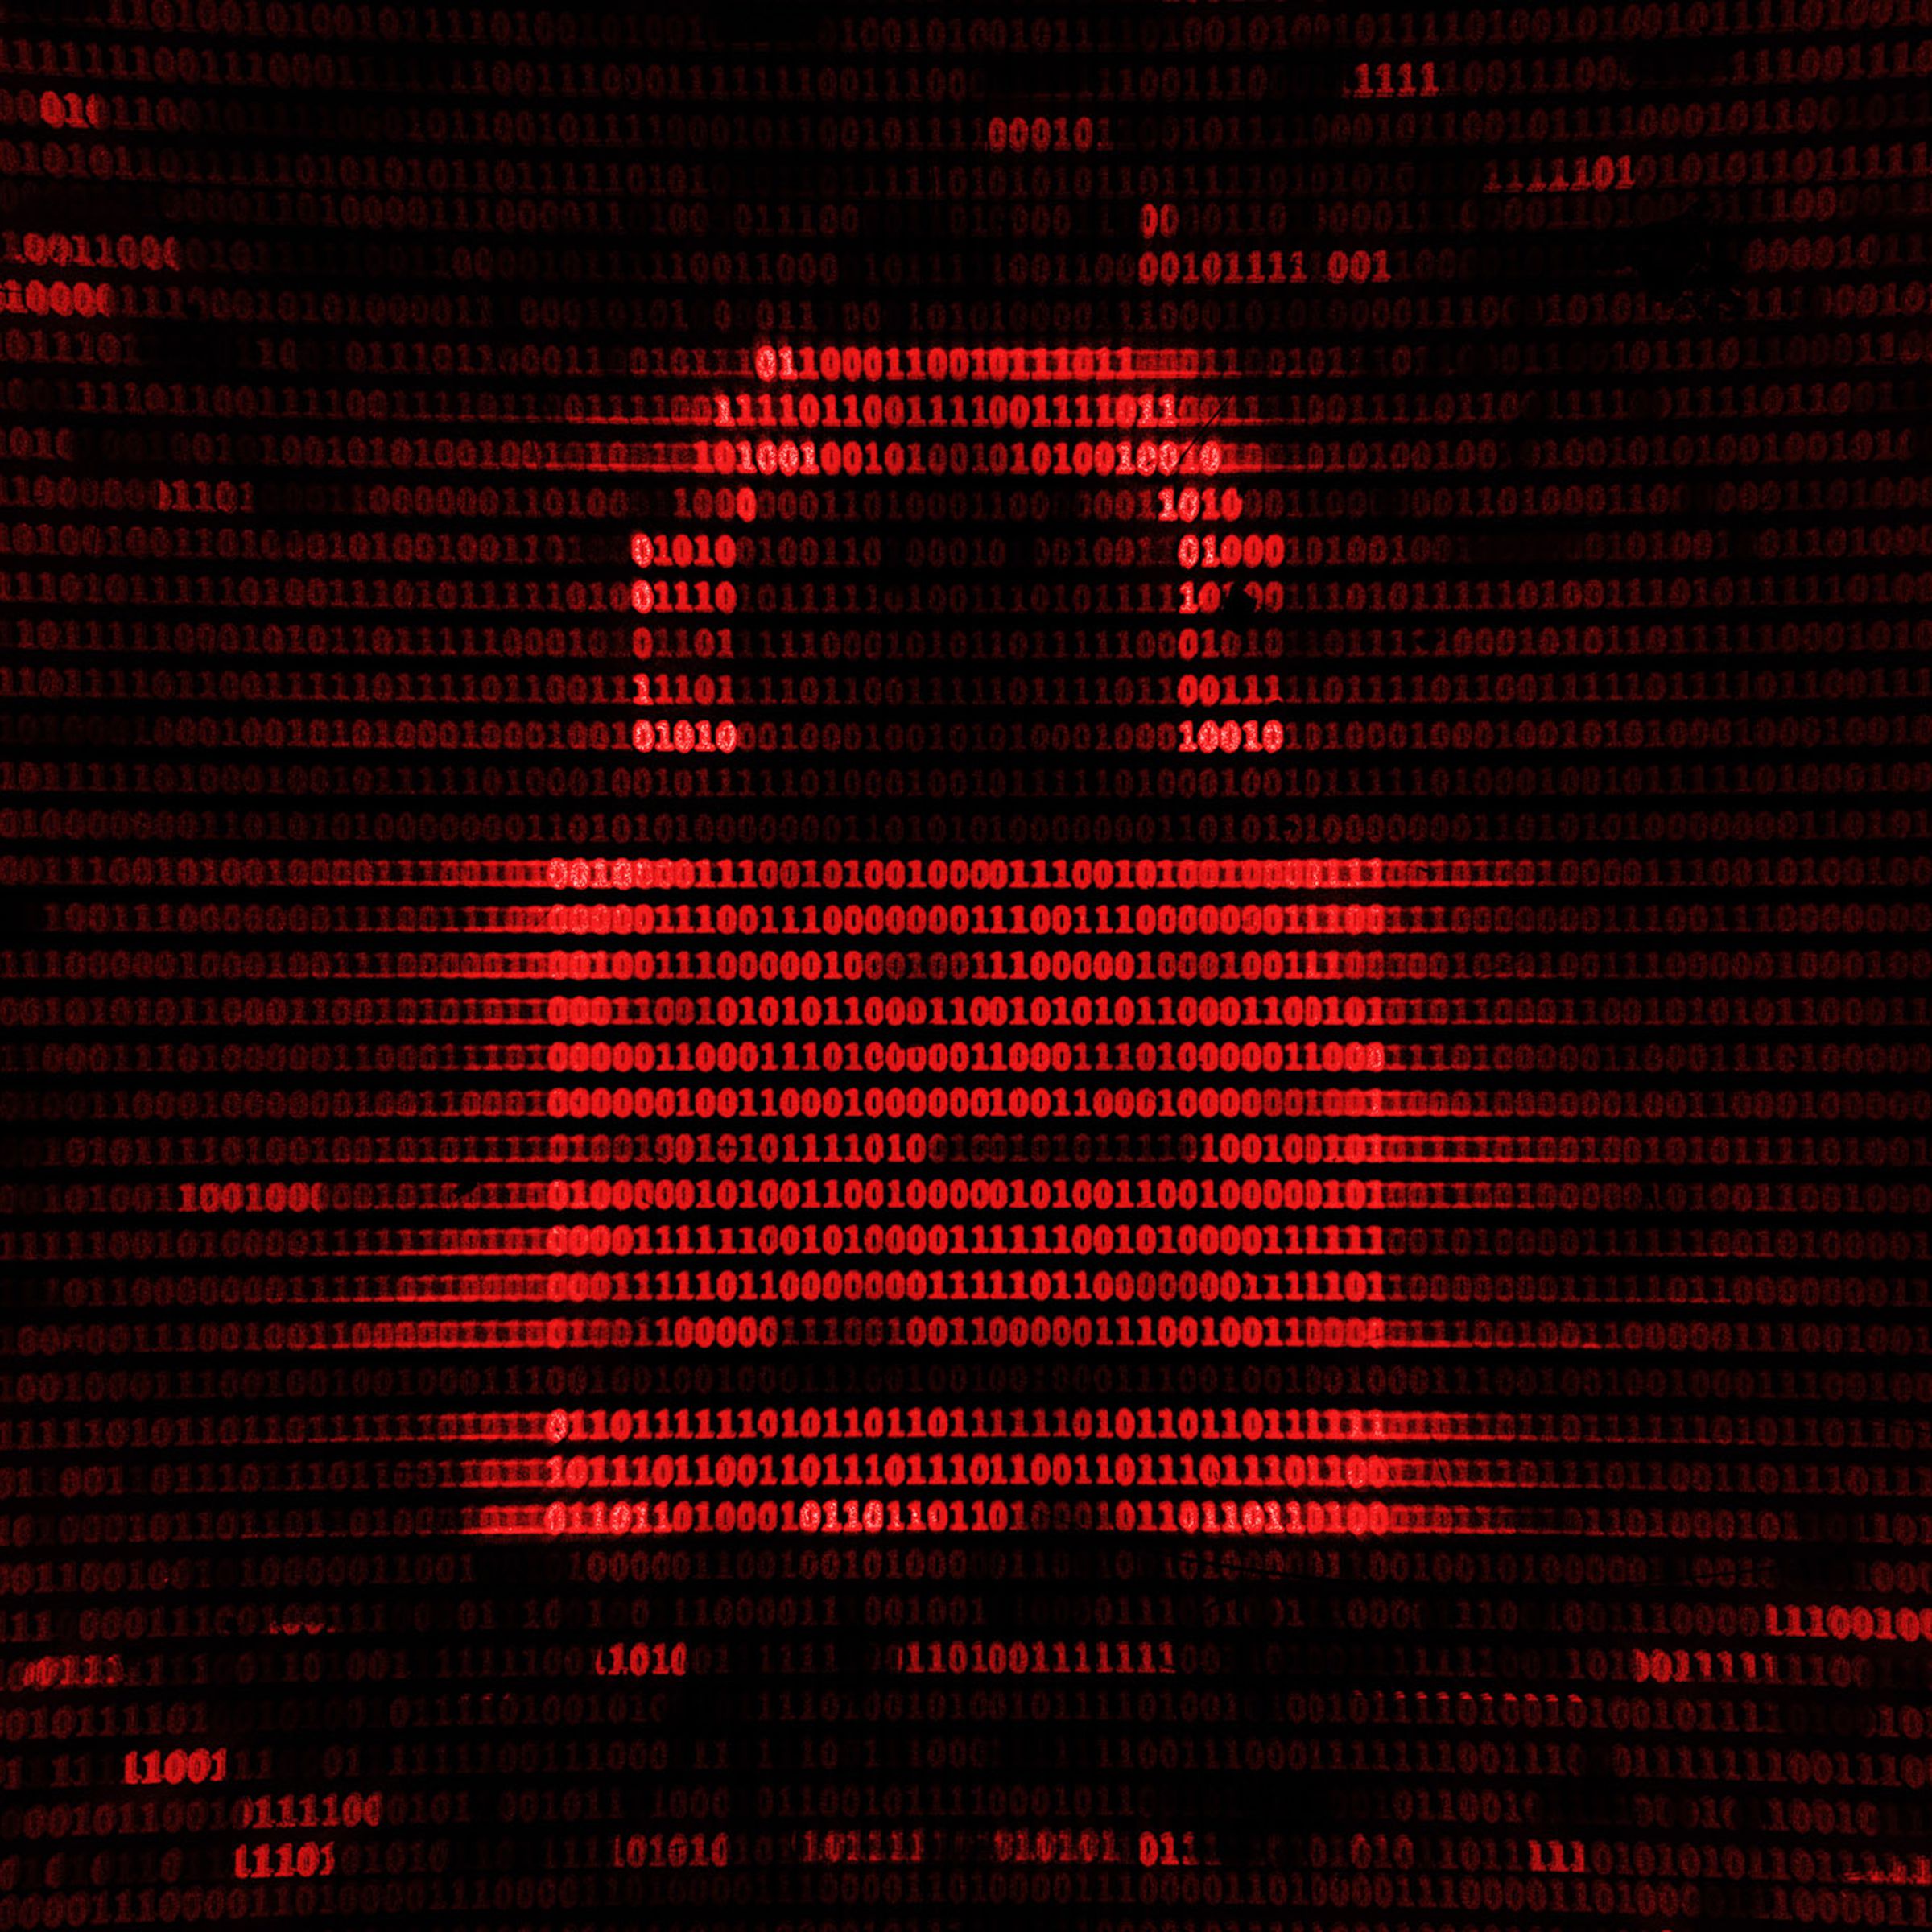 An image showing a red lock made up of code